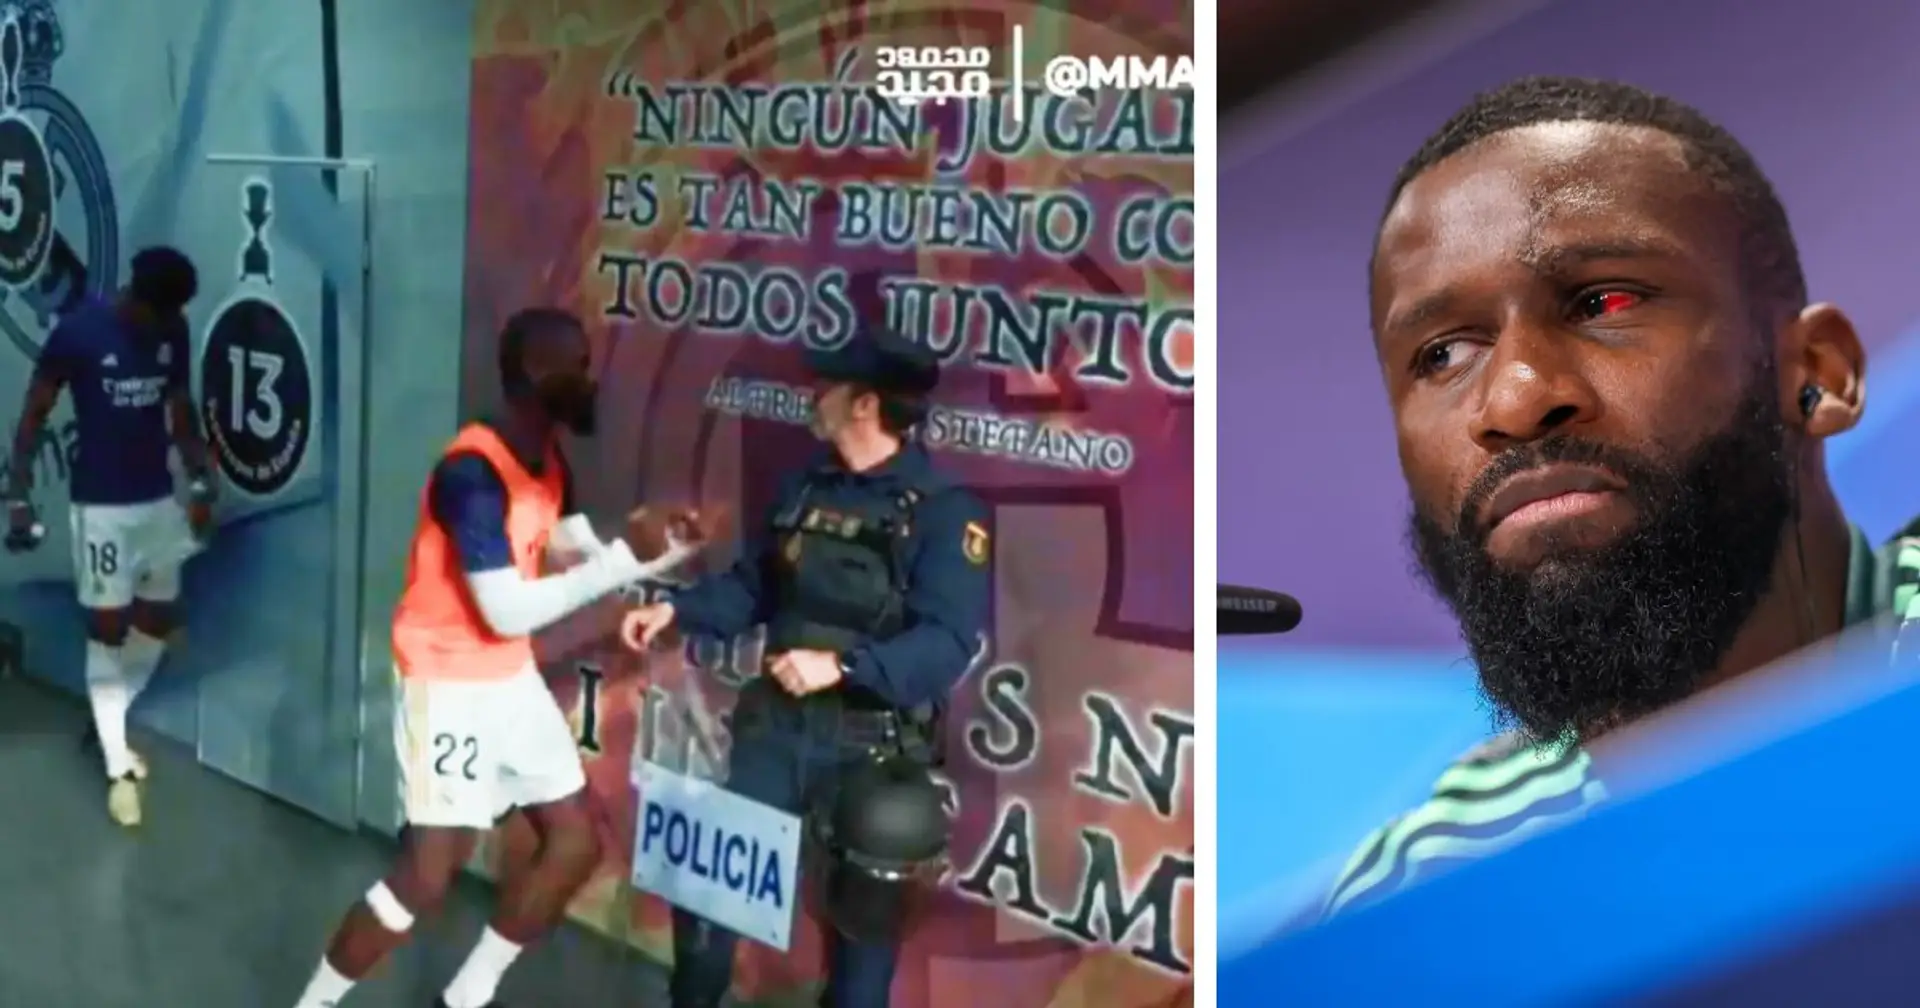 Rudgier nearly 'fights' police officer before Clasico - he returned with a gift